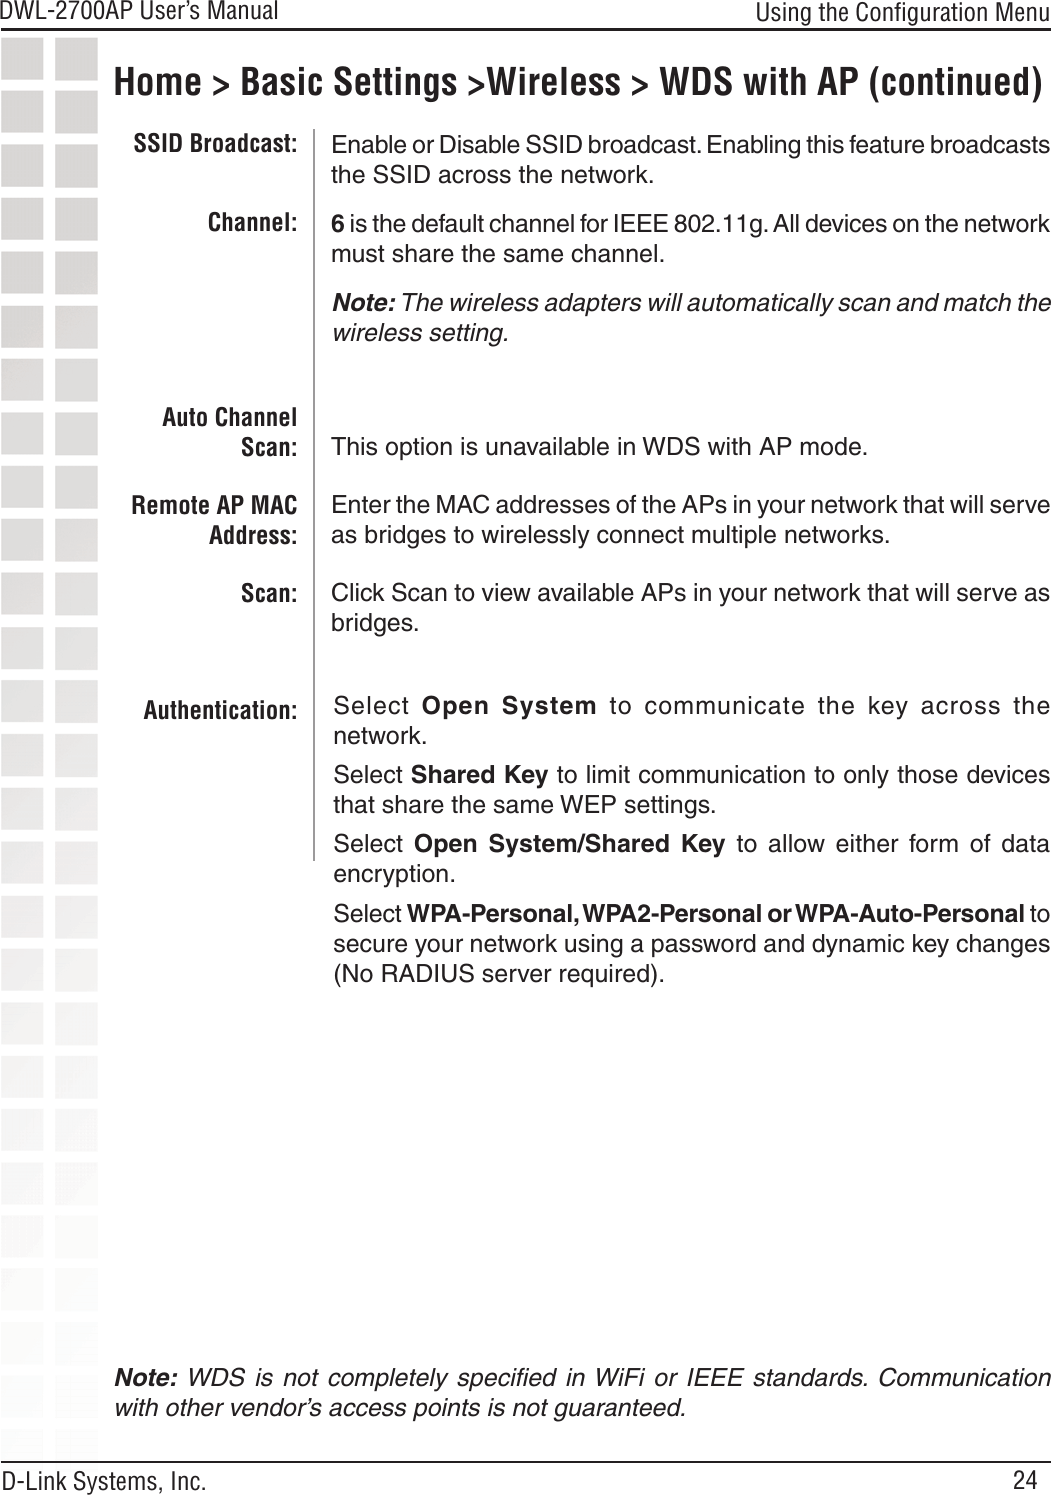 24DWL-2700AP User’s Manual D-Link Systems, Inc.Home &gt; Basic Settings &gt;Wireless &gt; WDS with AP (continued)Using the Conﬁguration MenuEnable or Disable SSID broadcast. Enabling this feature broadcasts the SSID across the network.6 is the default channel for IEEE 802.11g. All devices on the network must share the same channel. Note: The wireless adapters will automatically scan and match the wireless setting.This option is unavailable in WDS with AP mode.Enter the MAC addresses of the APs in your network that will serve as bridges to wirelessly connect multiple networks.Click Scan to view available APs in your network that will serve as bridges.SSID Broadcast:Channel:Auto Channel Scan:Remote AP MAC Address:Scan:Authentication:Note: WDS  is  not  completely  speciﬁed  in WiFi or  IEEE standards. Communication with other vendor’s access points is not guaranteed.Select  Open  System  to  communicate  the  key  across  the network.Select Shared Key to limit communication to only those devices that share the same WEP settings.Select  Open  System/Shared  Key  to  allow  either  form  of  data encryption.Select WPA-Personal, WPA2-Personal or WPA-Auto-Personal to secure your network using a password and dynamic key changes (No RADIUS server required).